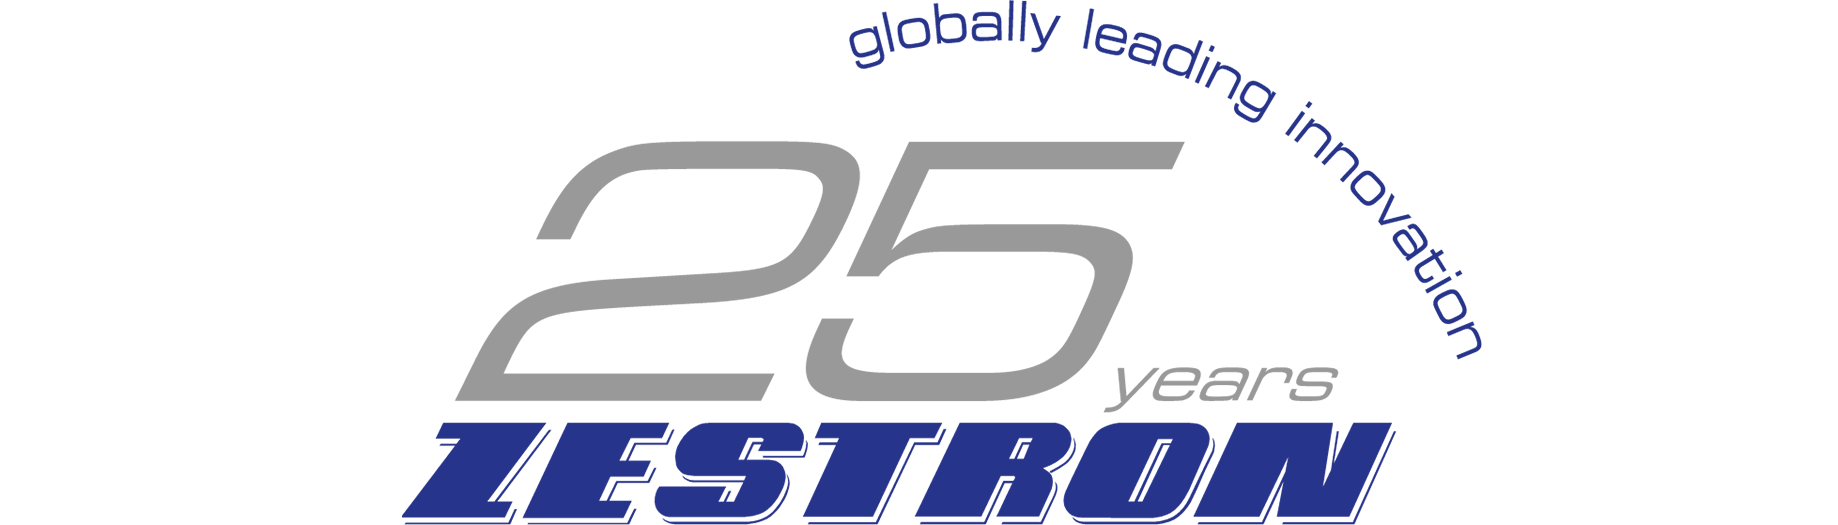 We congratulate Zestron with 25 Years of Globally Leading Innovations!